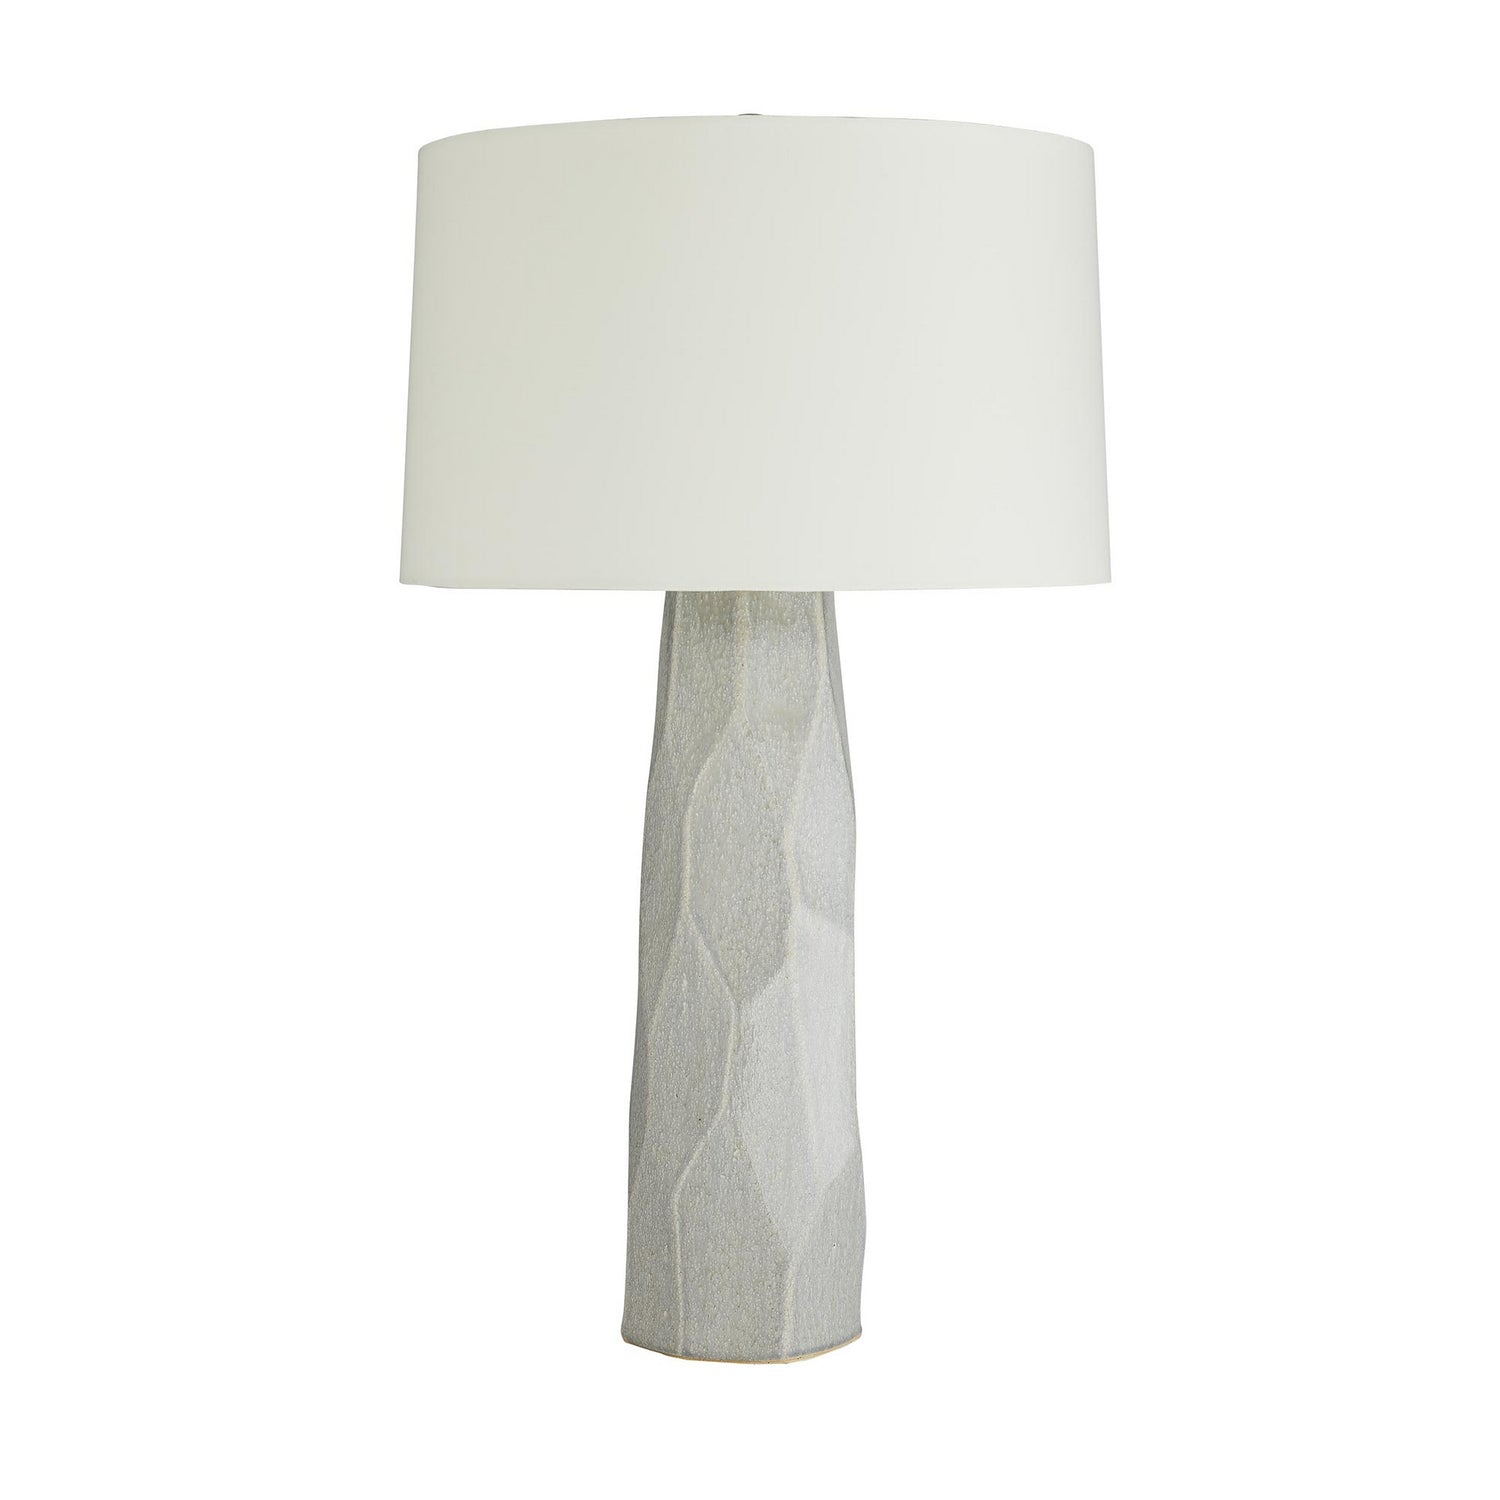 One Light Table Lamp from the Townsen collection in Icy Morn finish